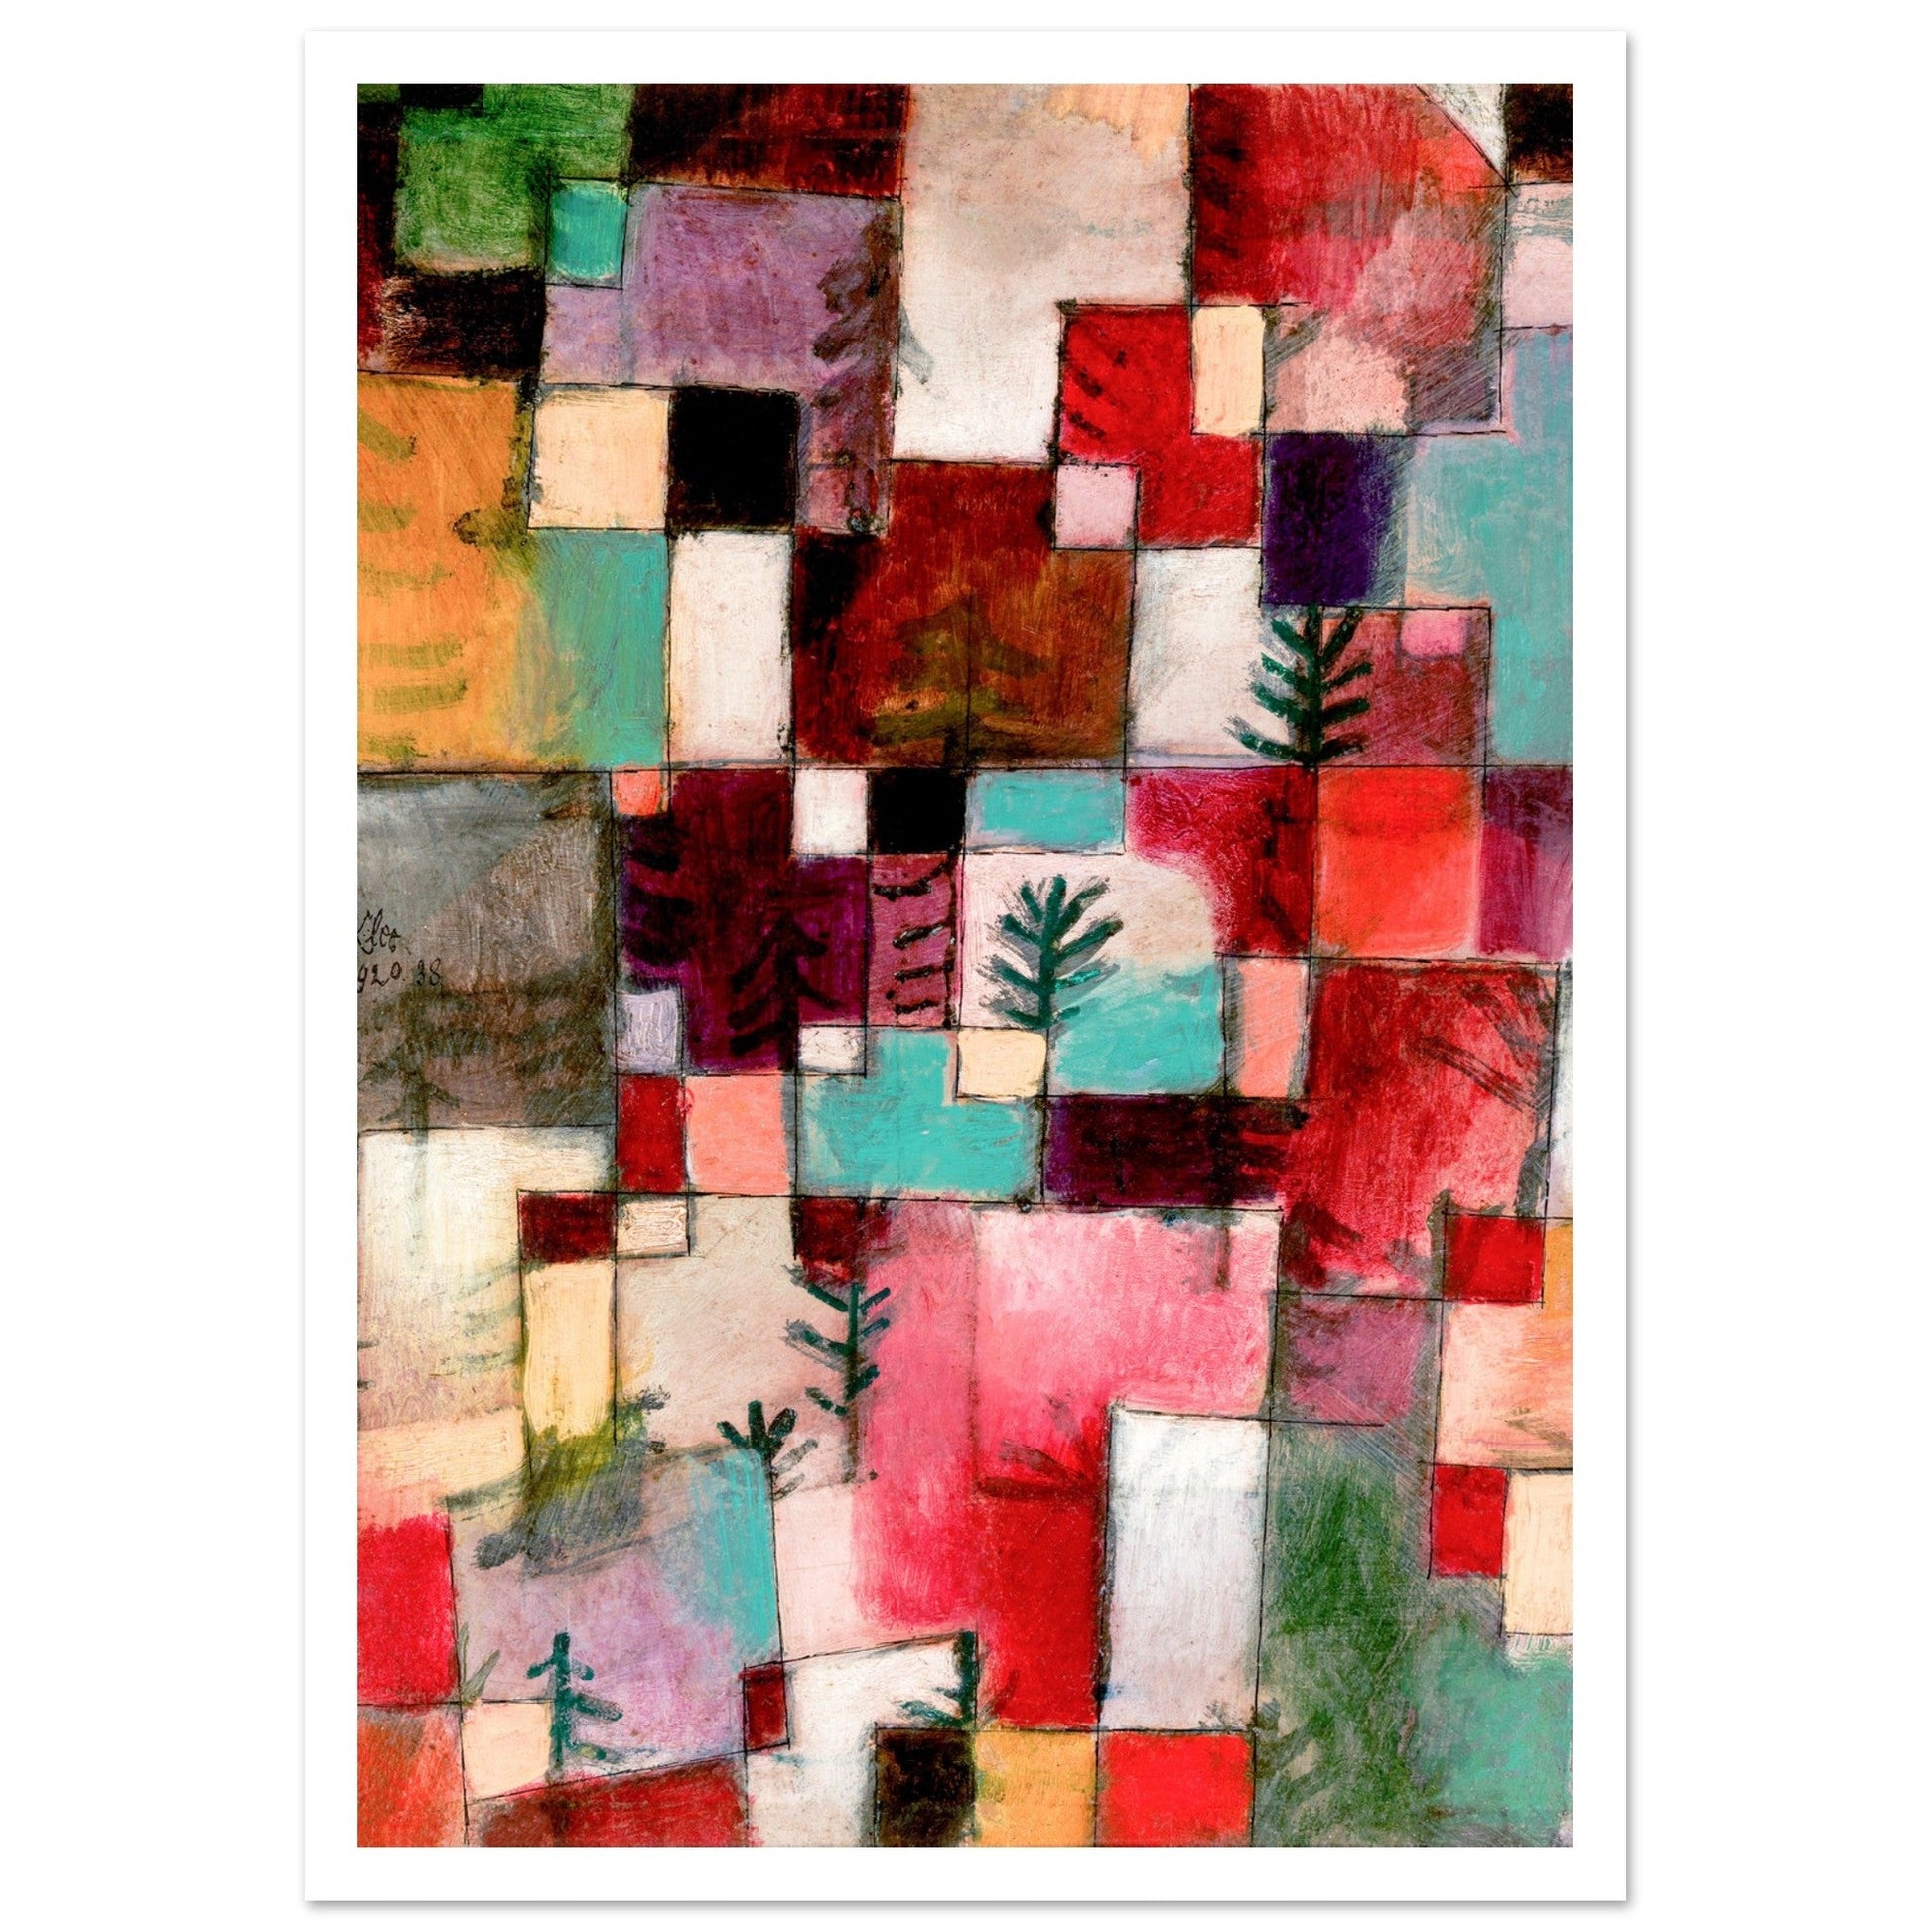 Paul Klee - Red Green and Violet–Yellow Rhythms, abstract, bauhau, paul klee, #illieeart